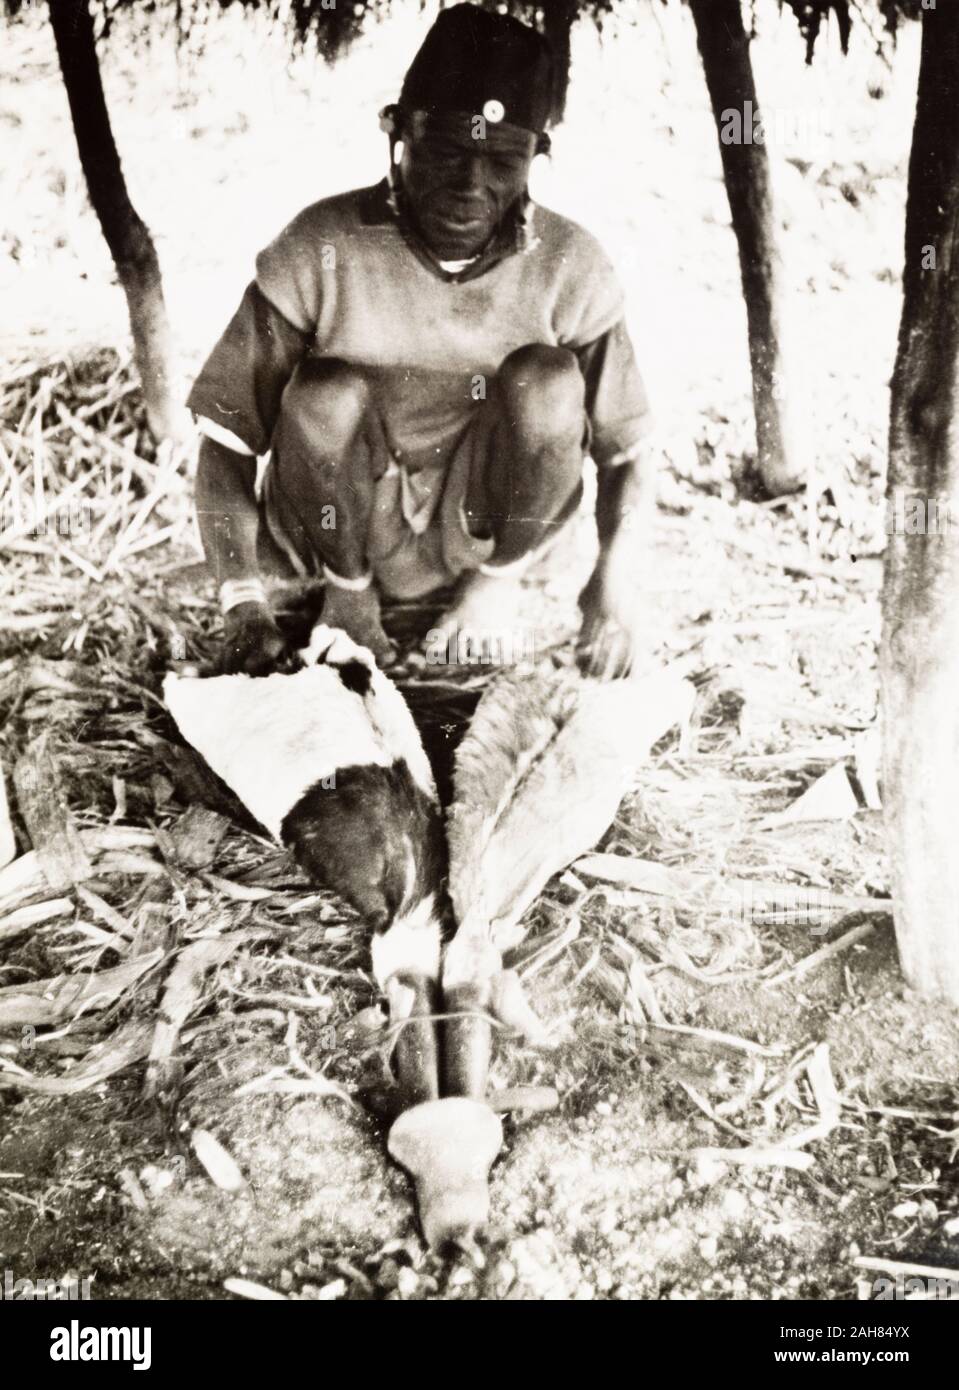 Kenya, A Kikuyu metalsmith operates a pair of goatskin bellows as he forges tools such as knives, pangas and swords in his workshop. Original manuscript caption: A Kikuyu smith. The bellows are goatskins (legs). Knifes, pangas, swords & fire chains are made with these primitive tools. South Nyeri 1936, 1937. 1995/076/1/2/5/20. Stock Photo